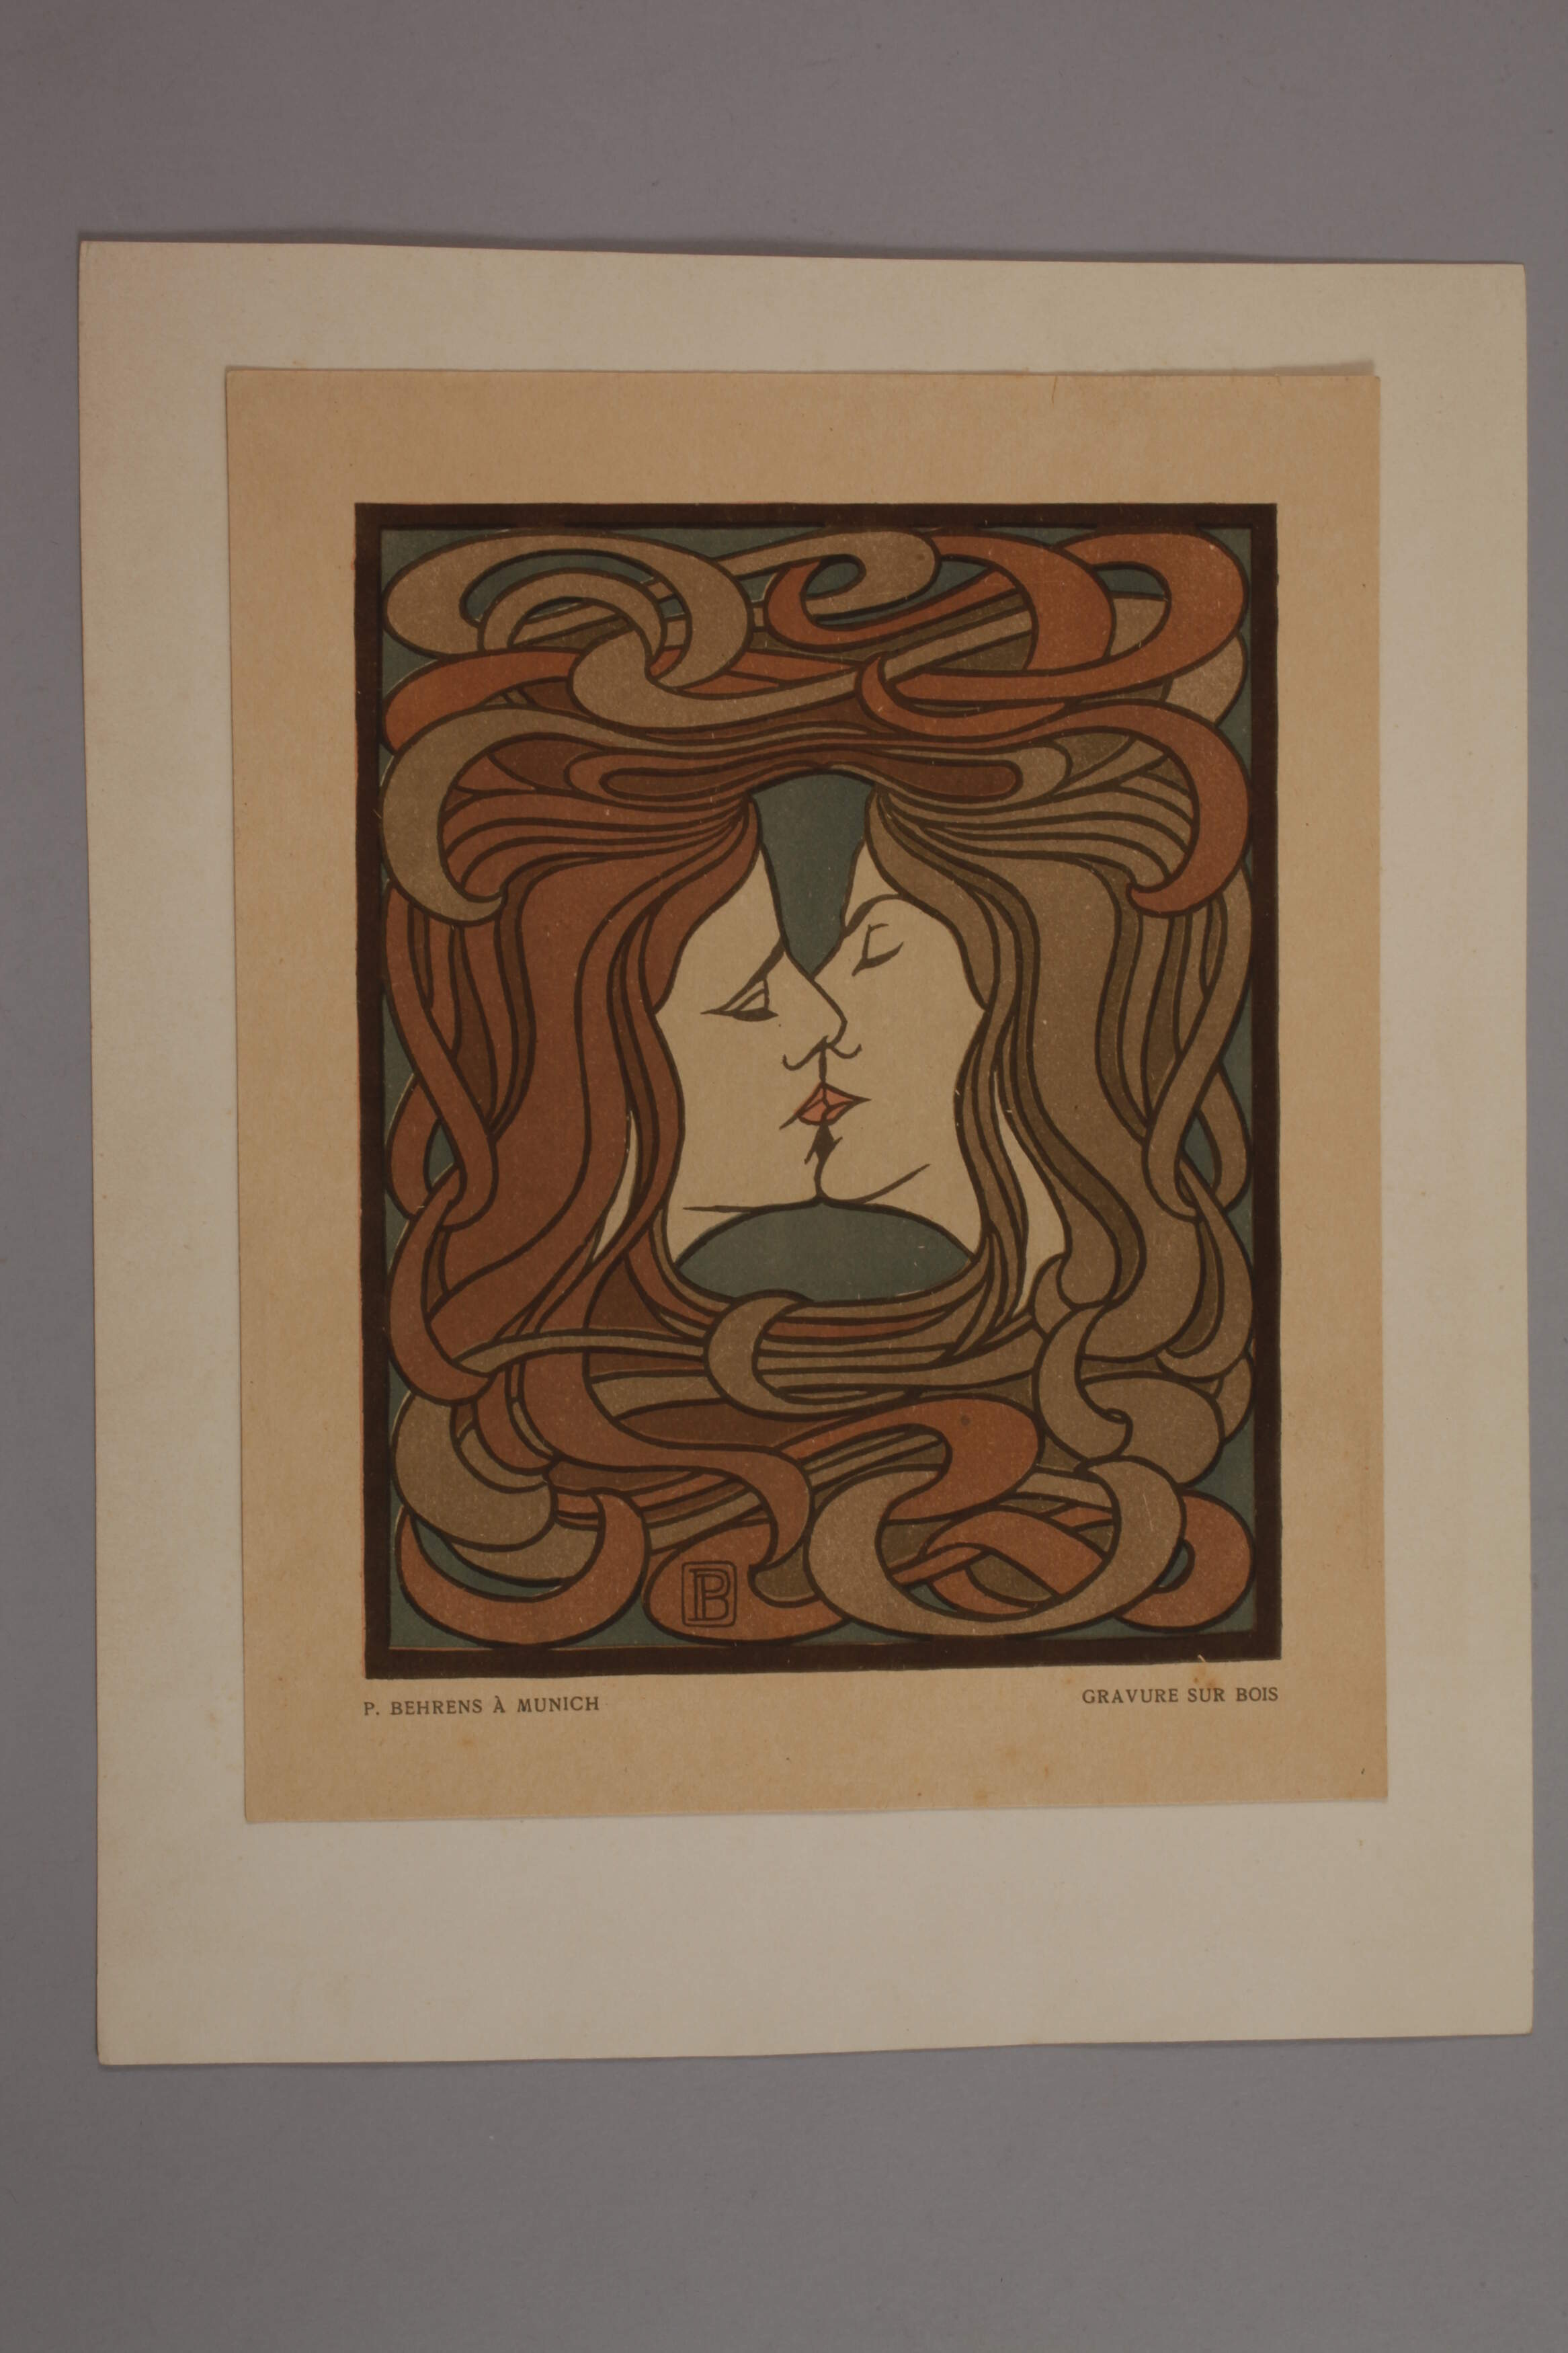 Prof. Peter Behrens, "The Kiss" - Image 2 of 3